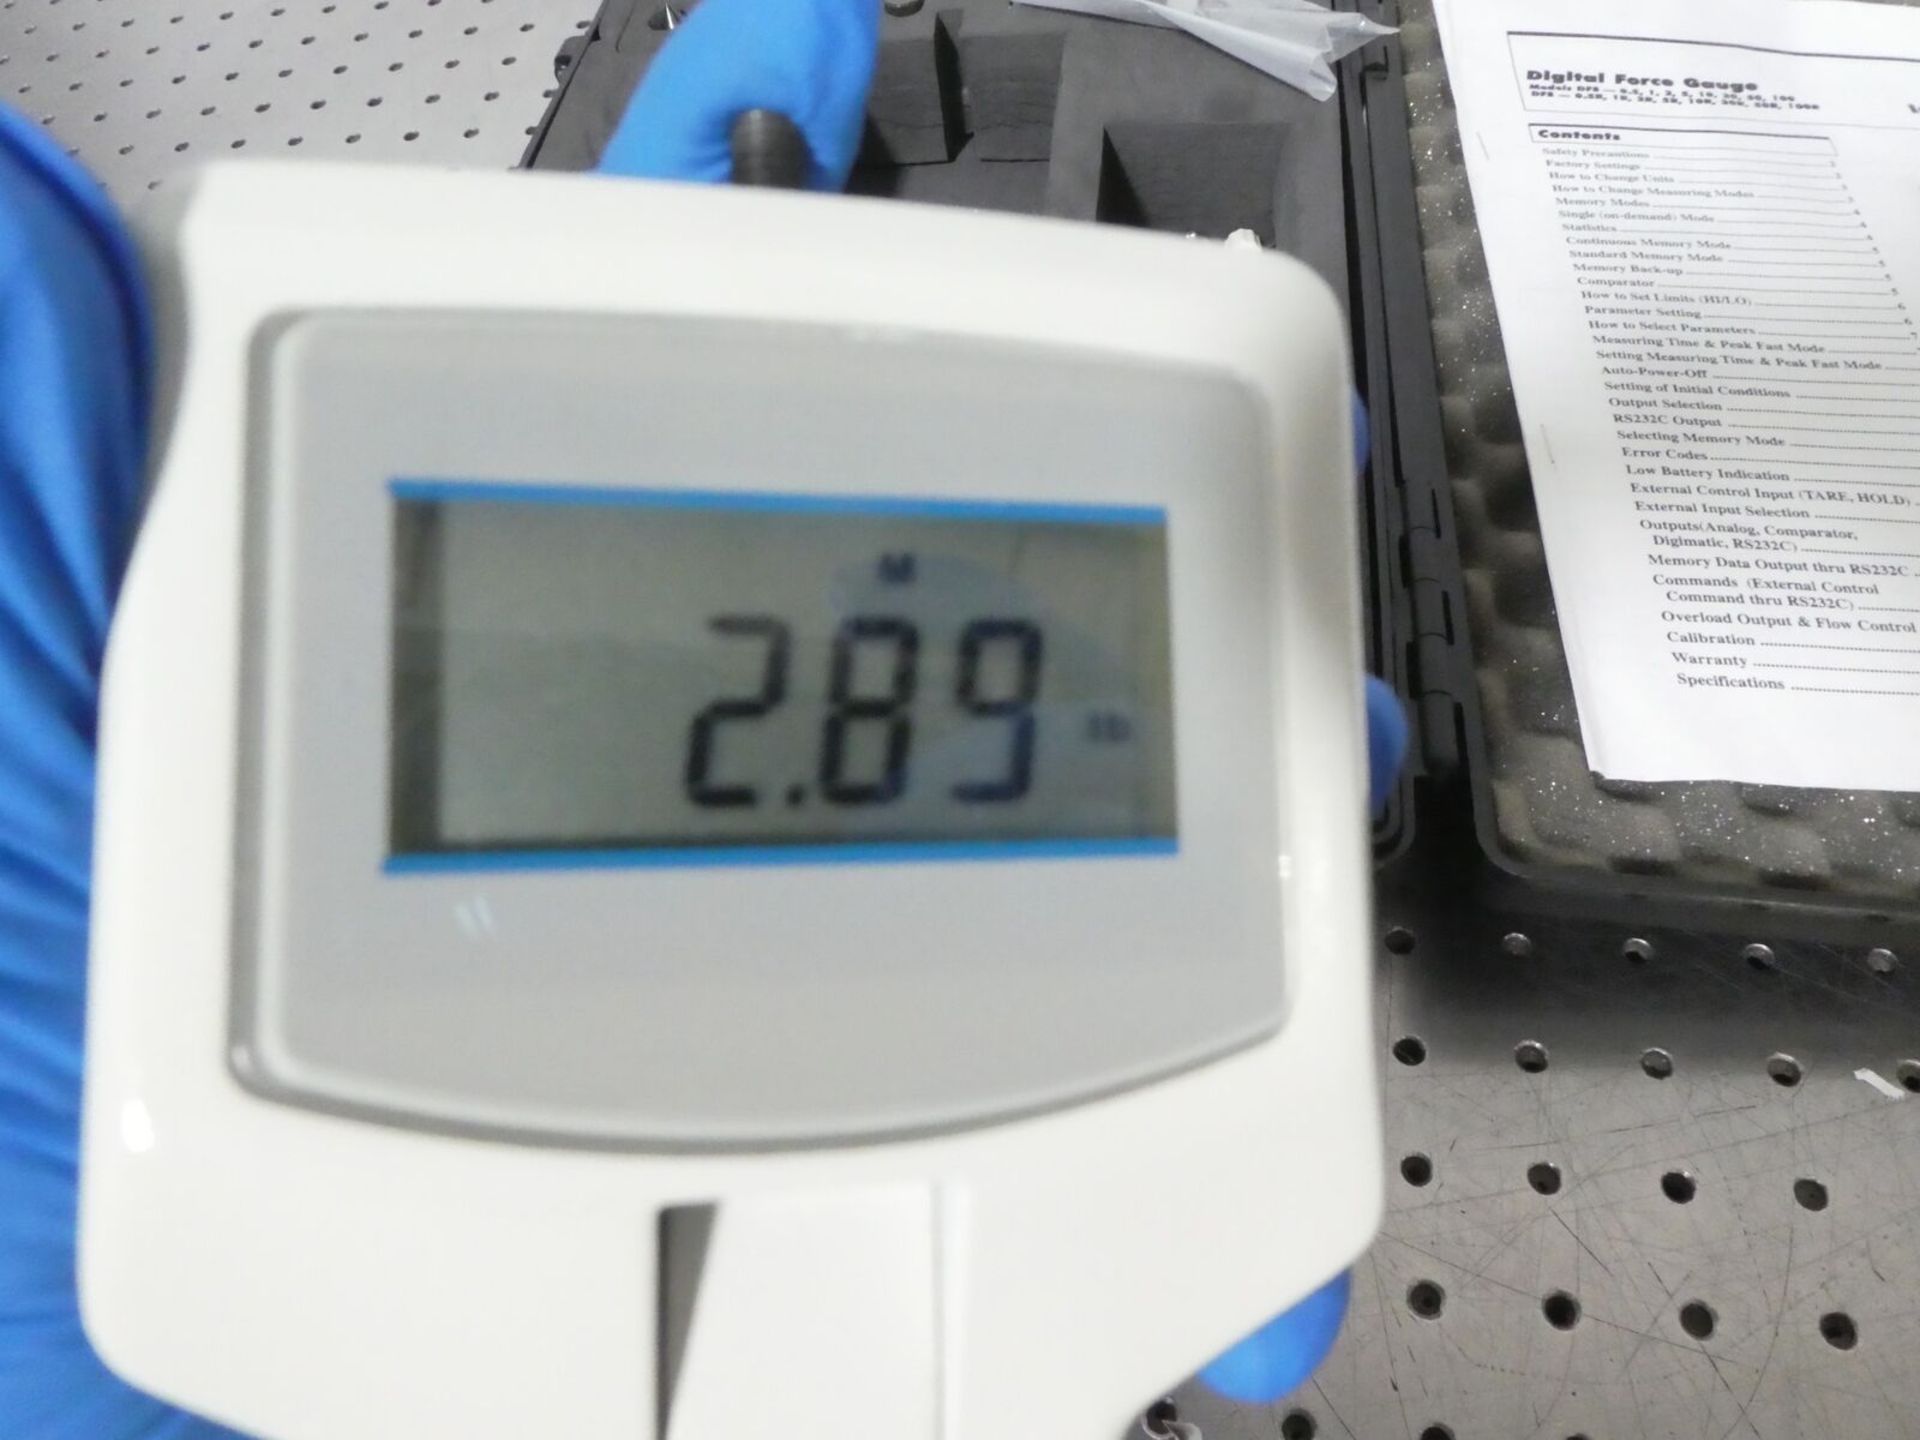 Shimpo Nidec Digital Force Gauge DFS-50 in Case w/ Accessories - Gilroy - Image 6 of 7